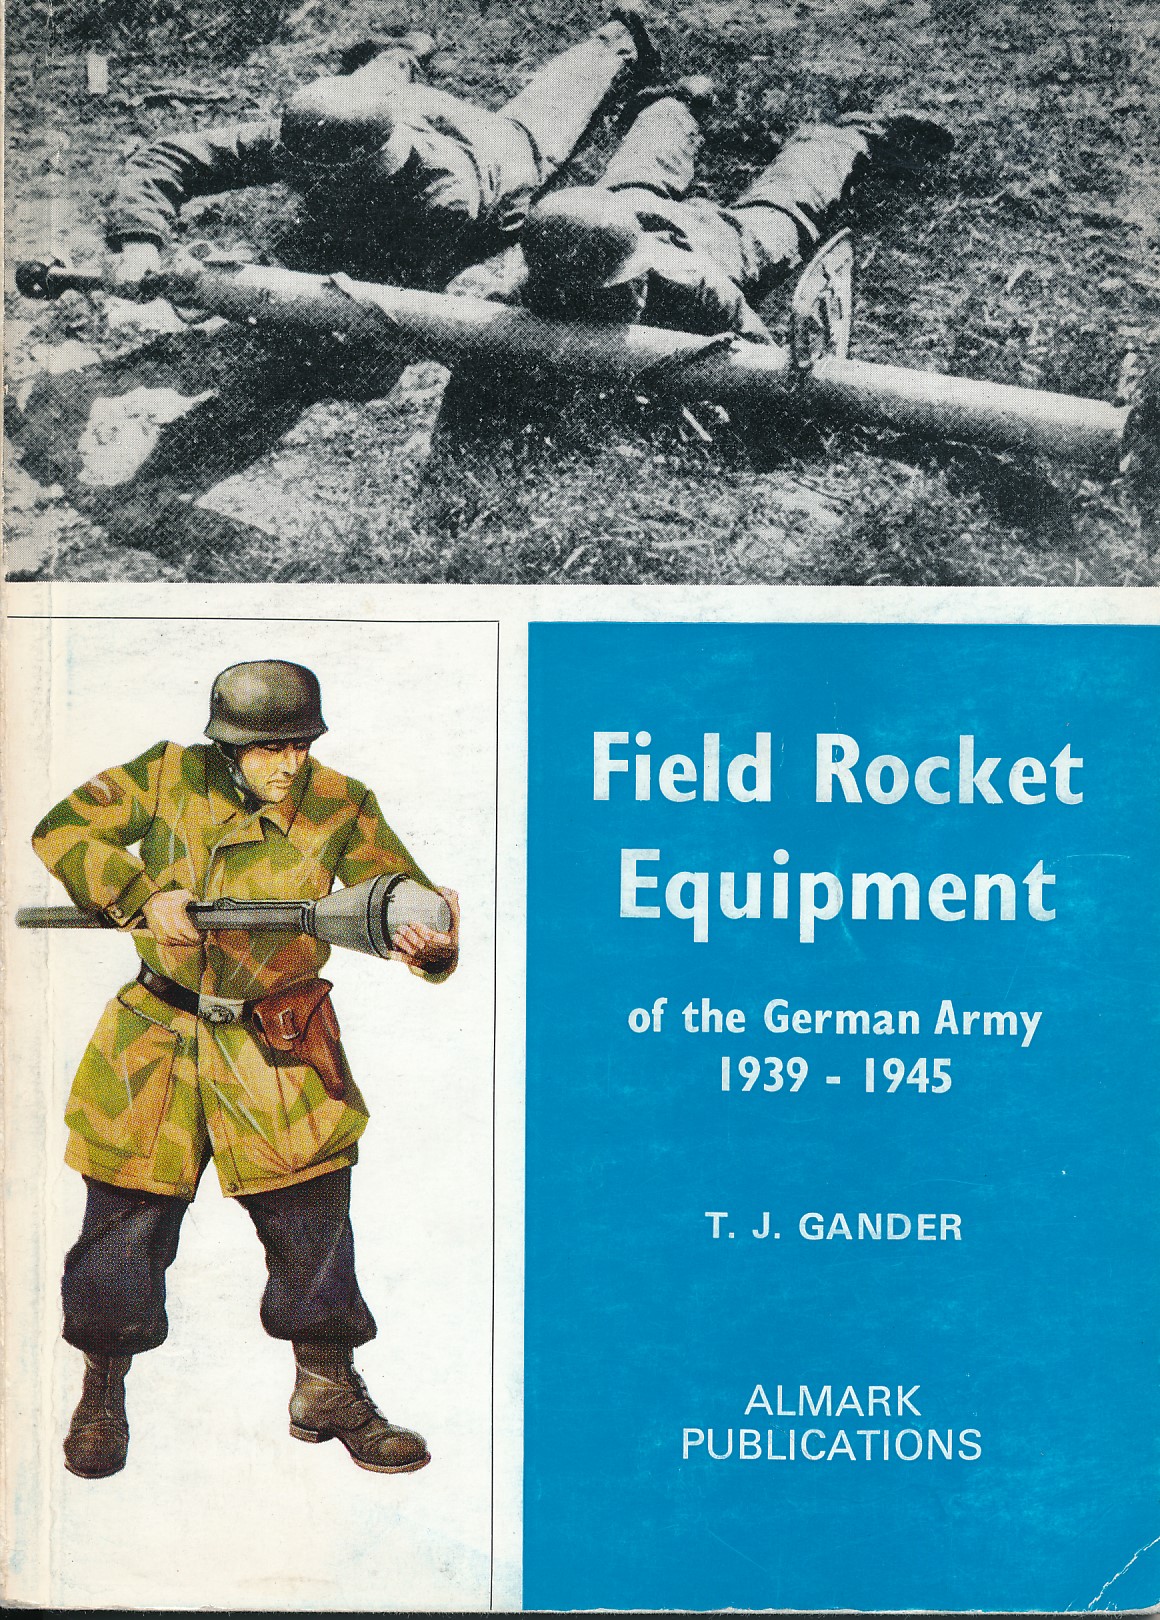 Field Rocket Equipment of the German Army 1939-1945